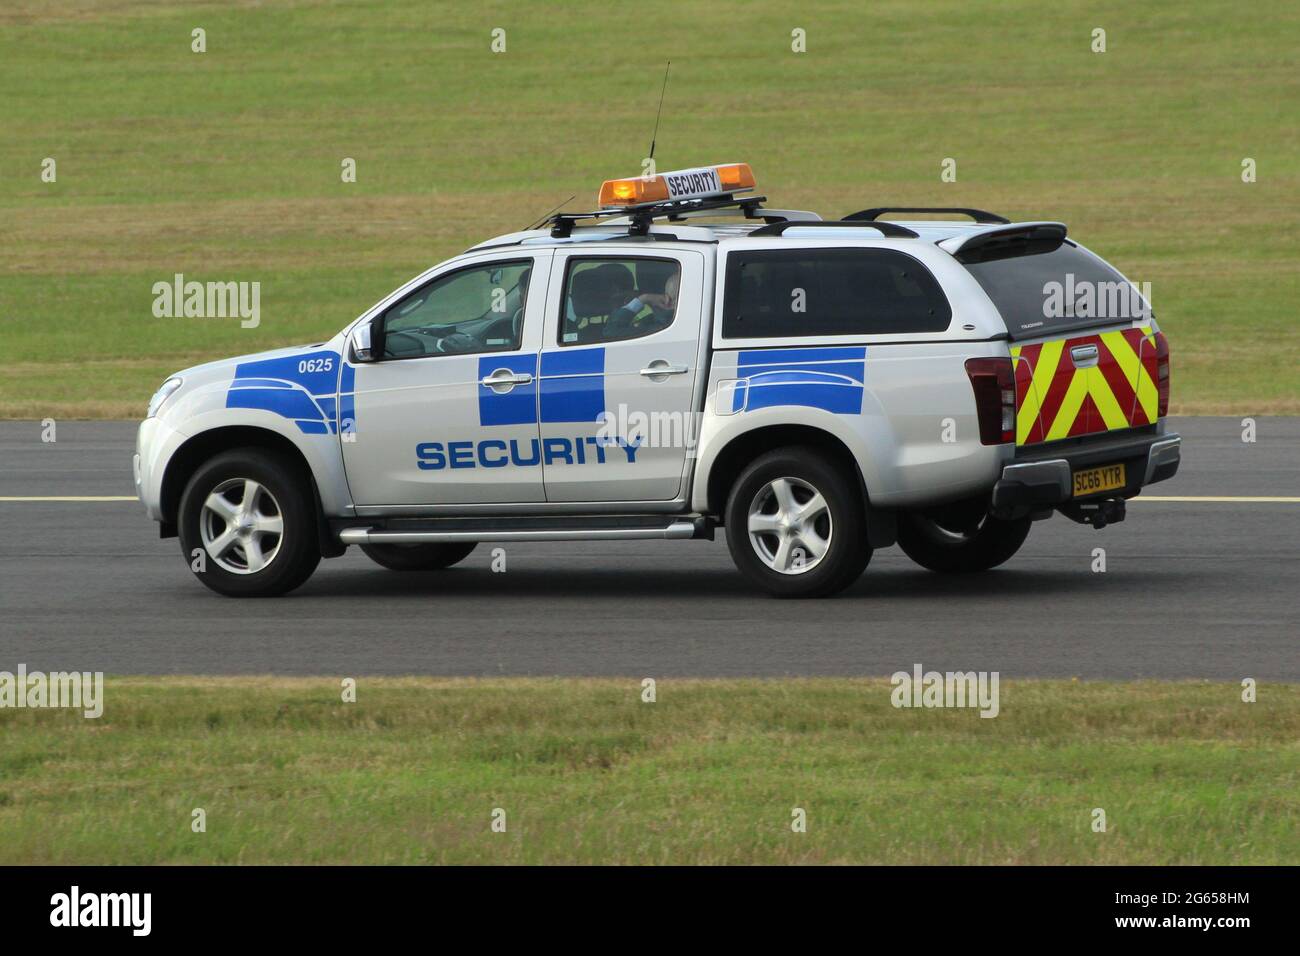 0625 (SC66 YTR), an Isuzu D-Max operated by the Security department at Prestwick International Airport in Ayrshire, Scotland. Stock Photo